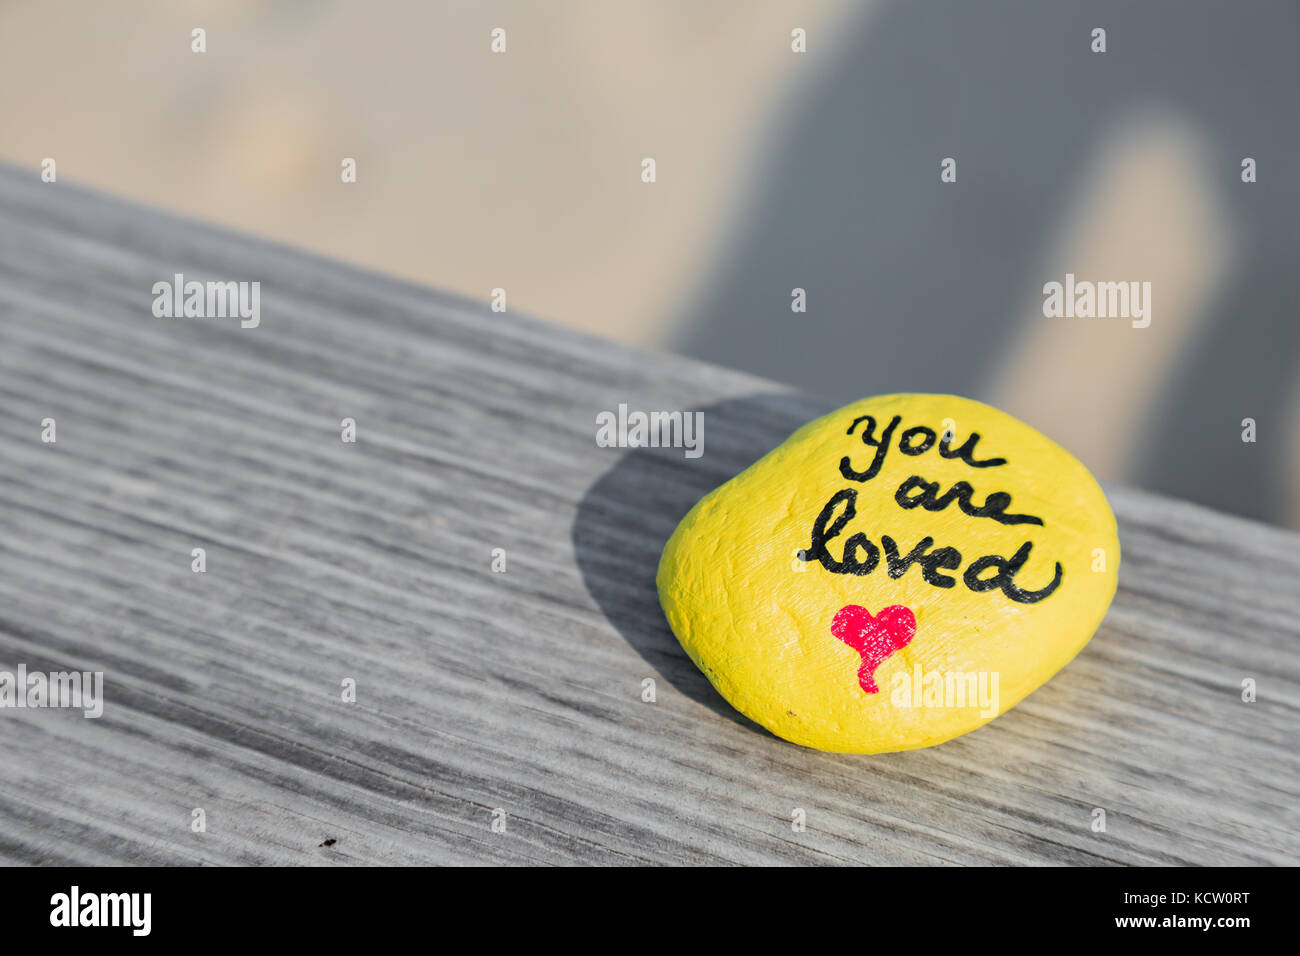 People create kindness rocks for others to find. This one was spotted at the beach. Stock Photo